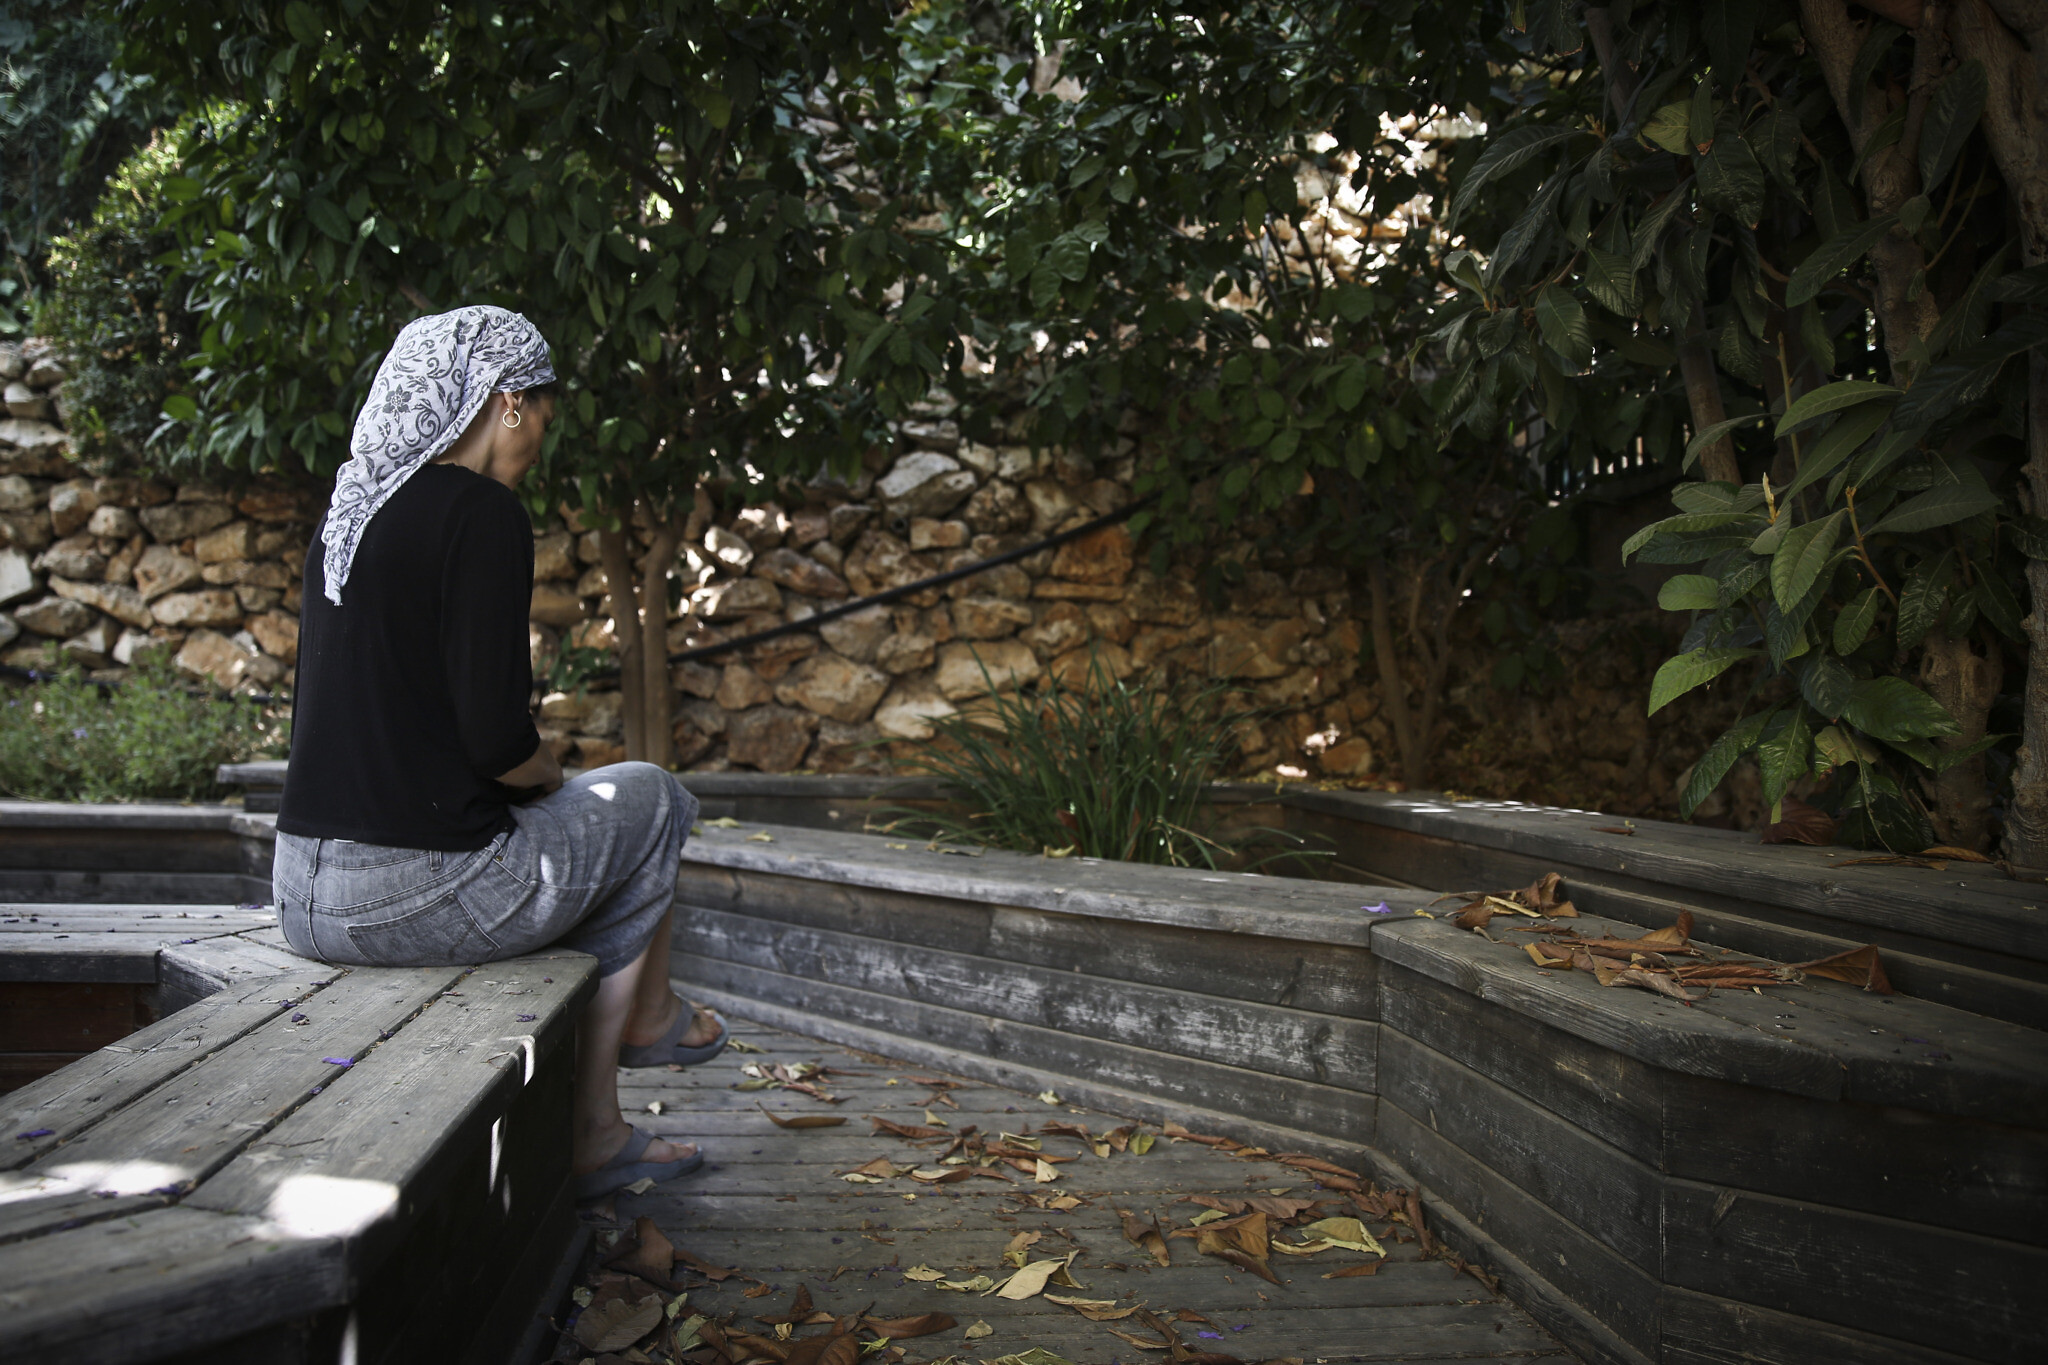 Orthodox Jewish woman sitting in a garden of a women's shelter for domestic violence